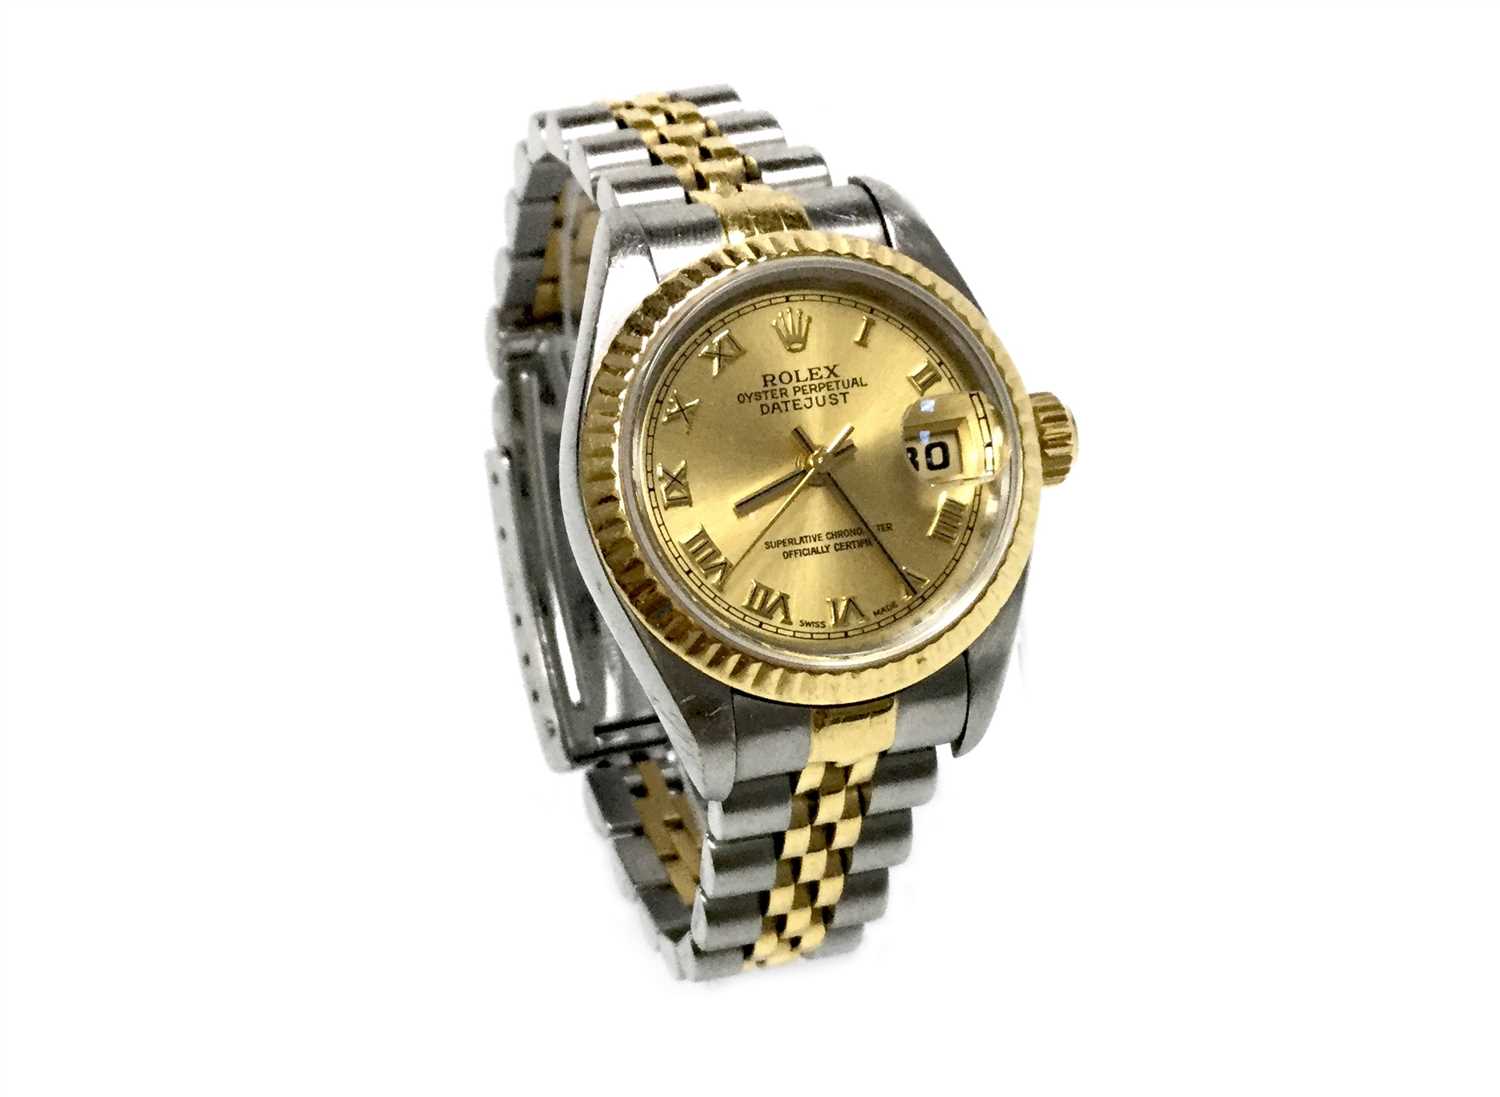 Lot 766 - A LADY'S ROLEX OYSTER DATEJUST WATCH